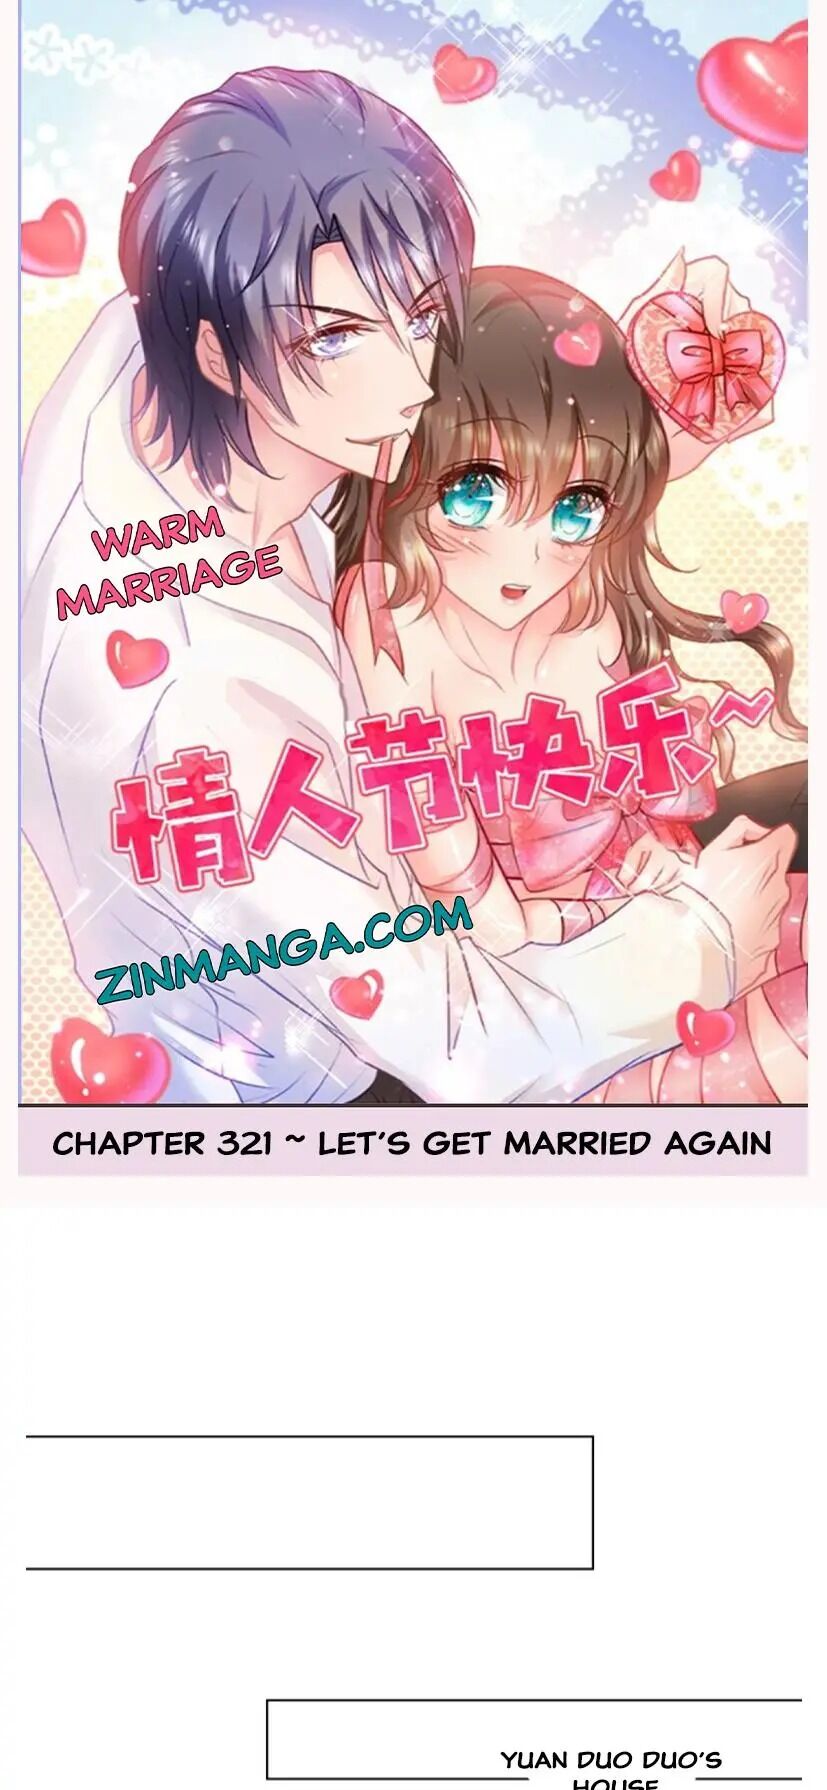 Into the Bones of Warm Marriage ch.321